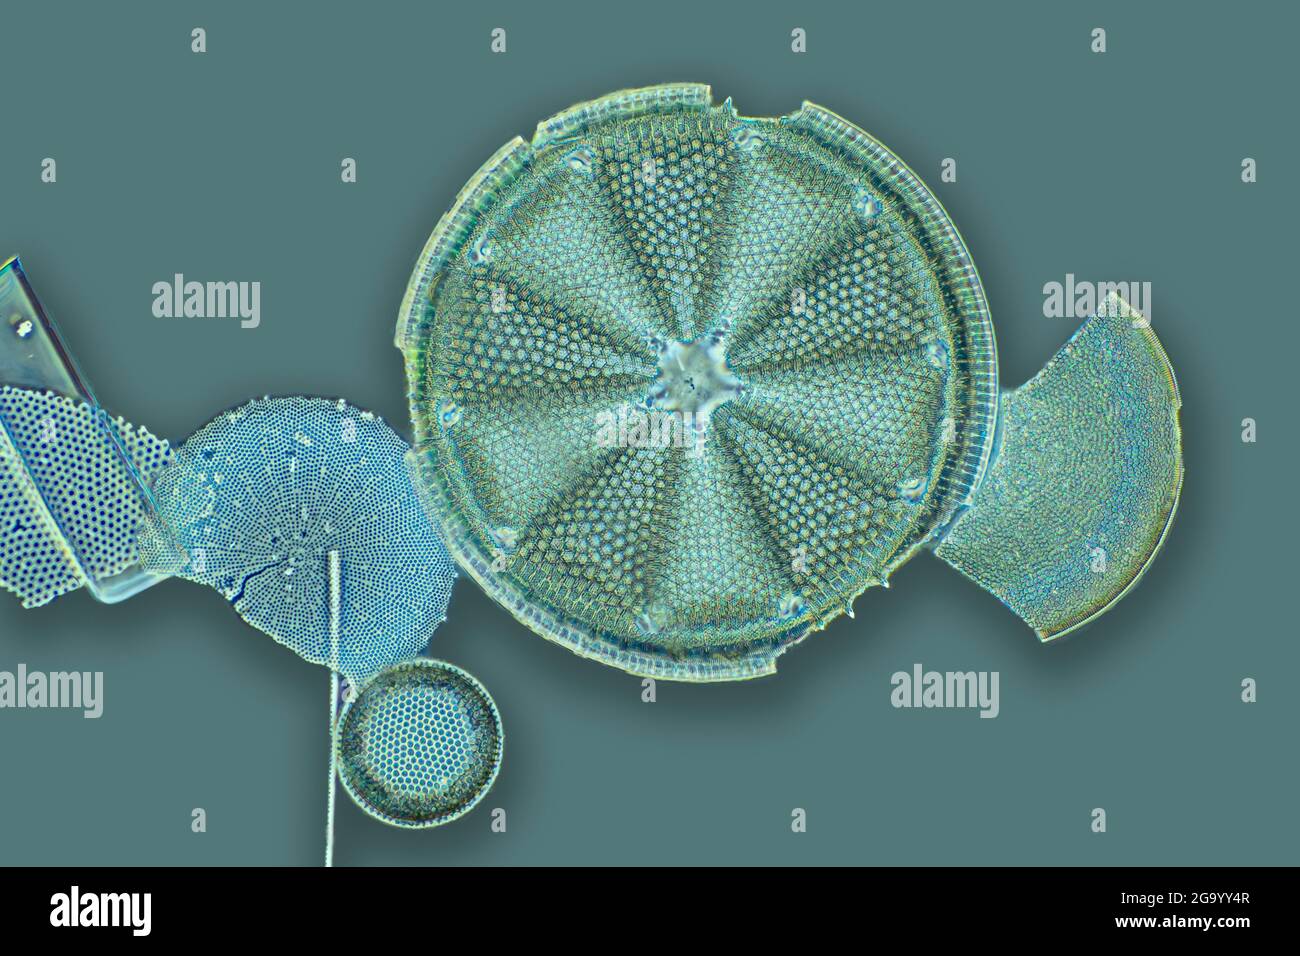 diatom (Diatomeae), phase contrast MR image of a diatom, magnification x430 related to a print of 10 cm width, USA, Maryland, Dunkirk Stock Photo